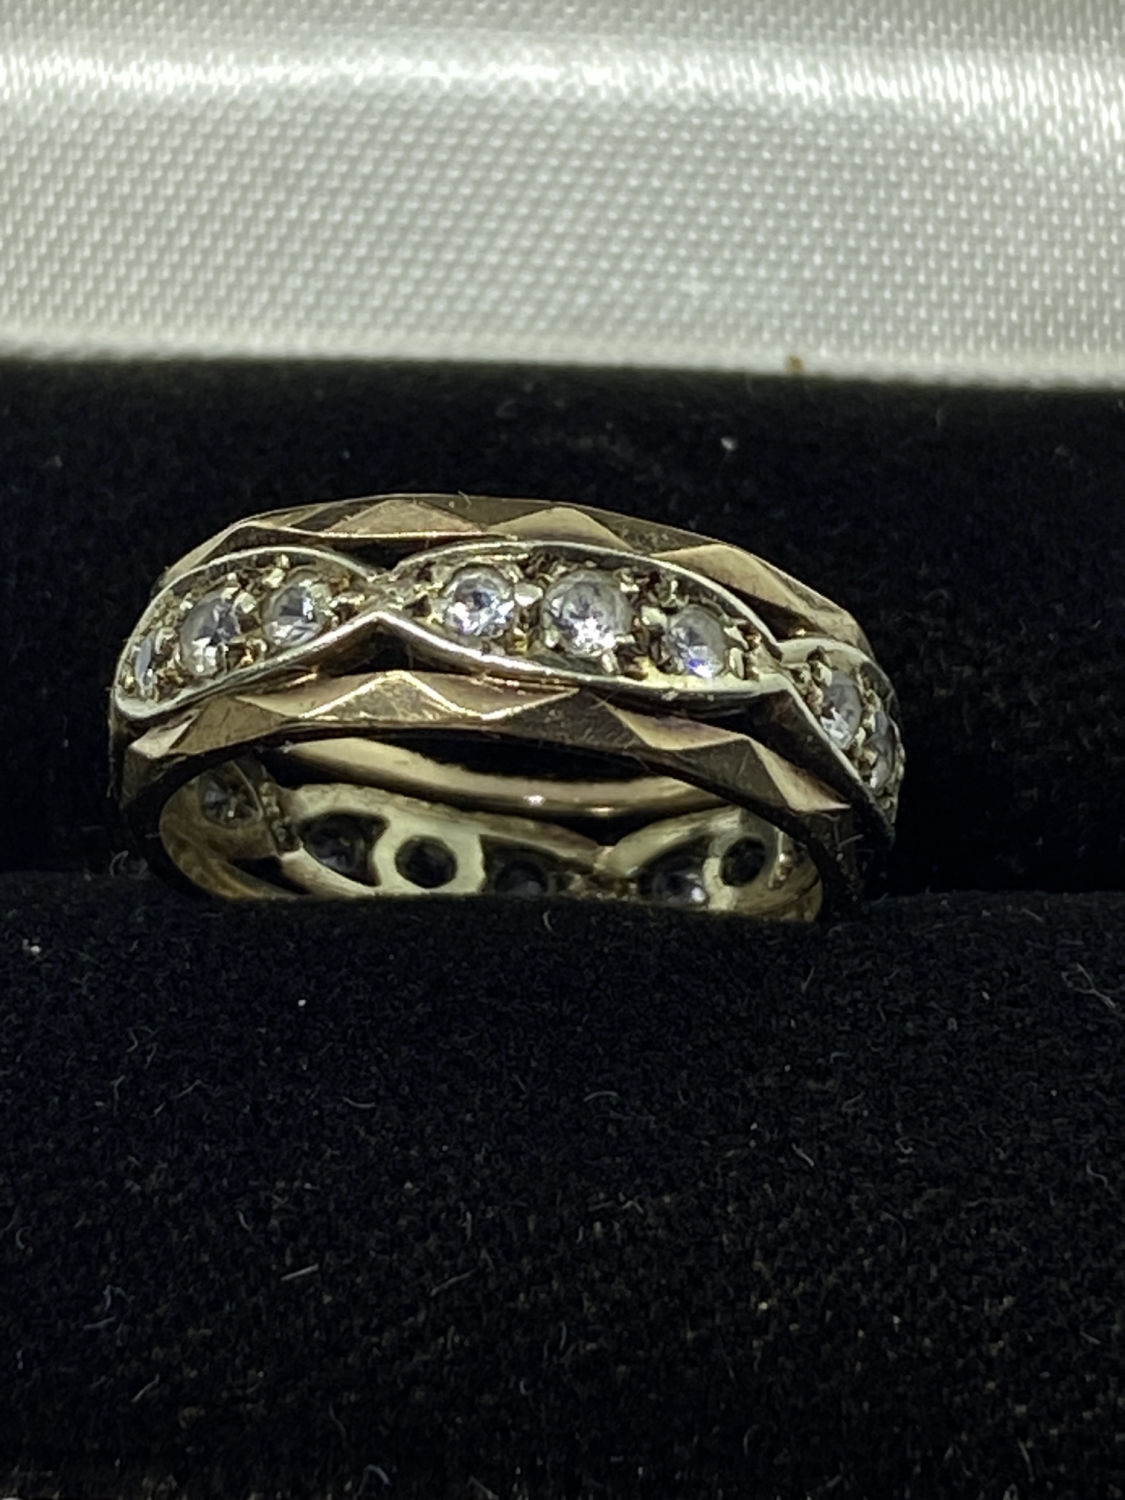 9ct GOLD FULL ETERNITY RING SET WITH CLEAR STONES